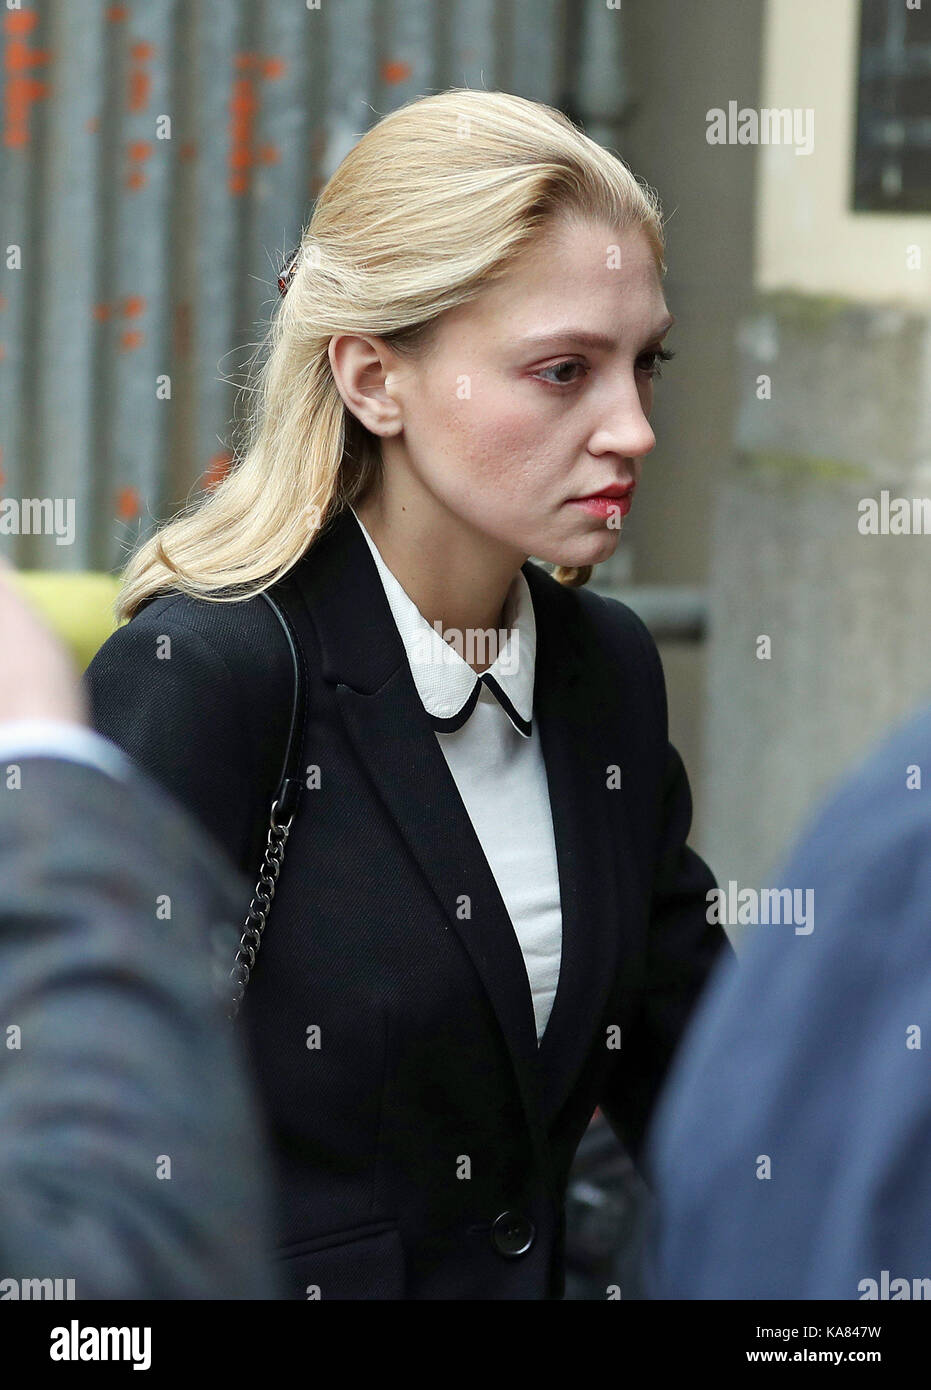 Lavinia Woodward, 24, arriving at Oxford Crown Court where she is due to be sentenced for stabbing her boyfriend with a bread knife at Christ Church College. Stock Photo